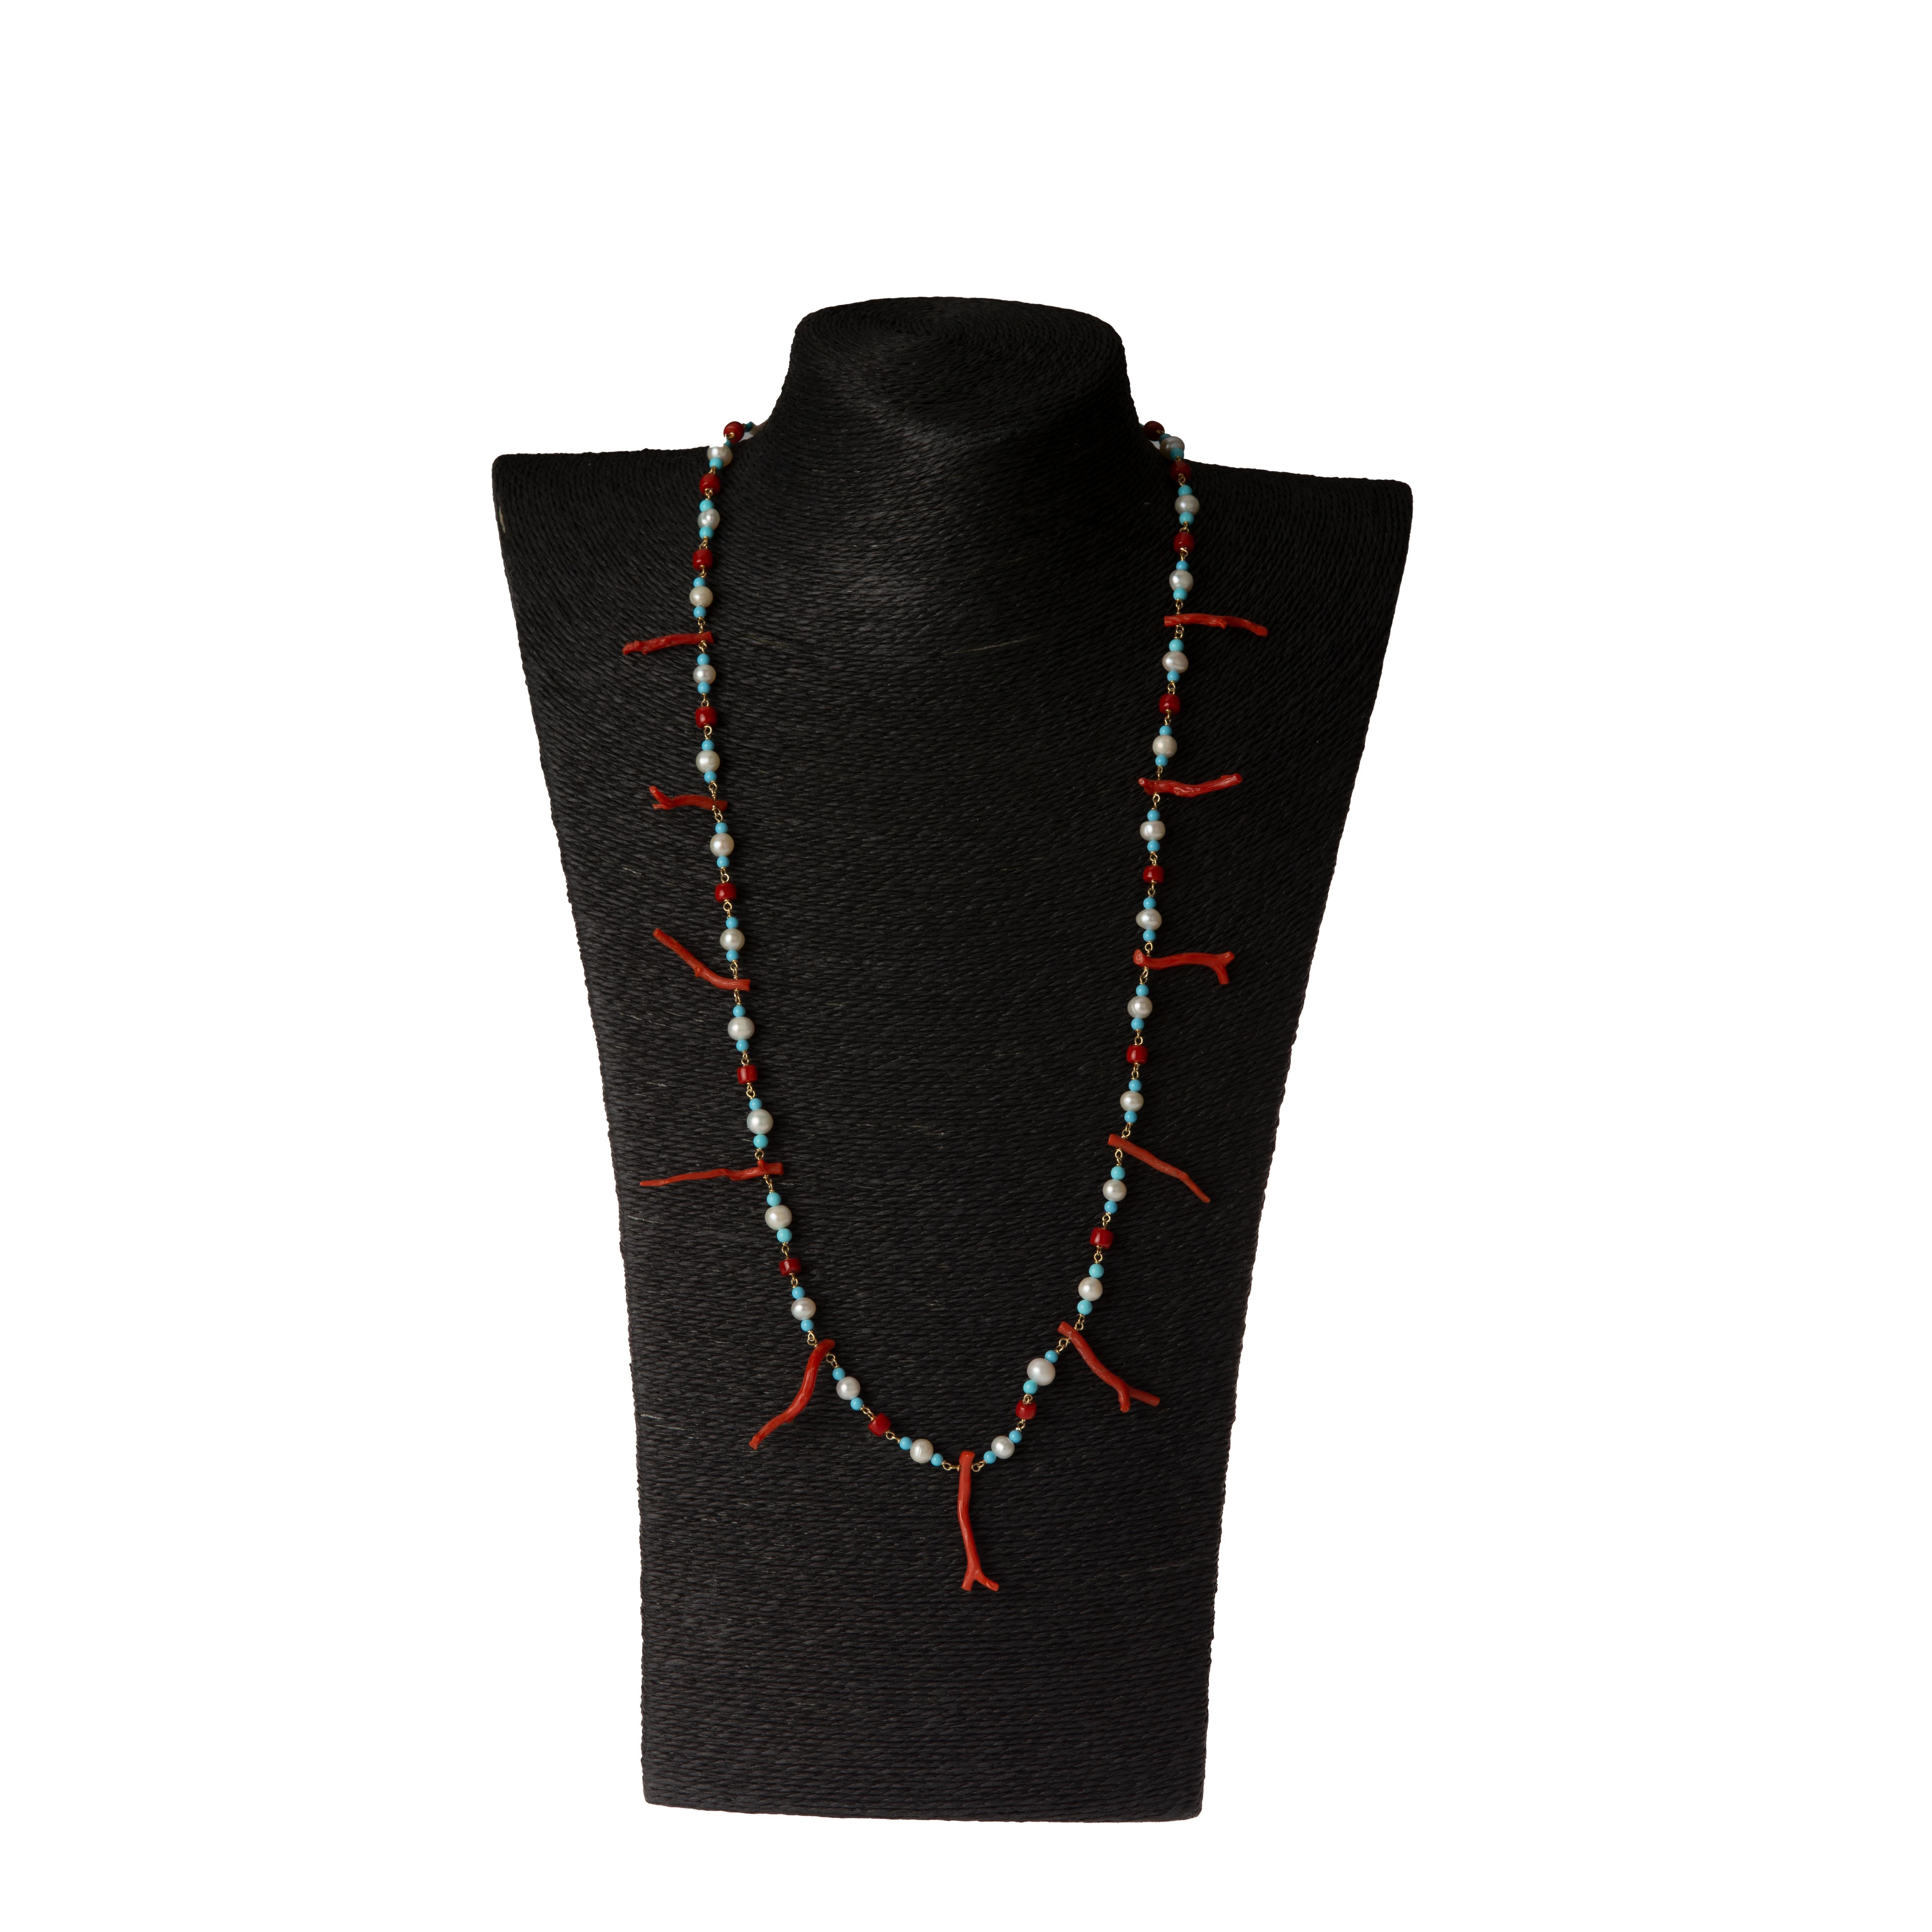 Long necklace with natural red Italian coral branch Gold, total length 80 cm.
You ca were the branch on the side and also making 2 Lap on the neck as your preference.
All Giulia Colussi jewelry is new and has never been previously owned or worn.